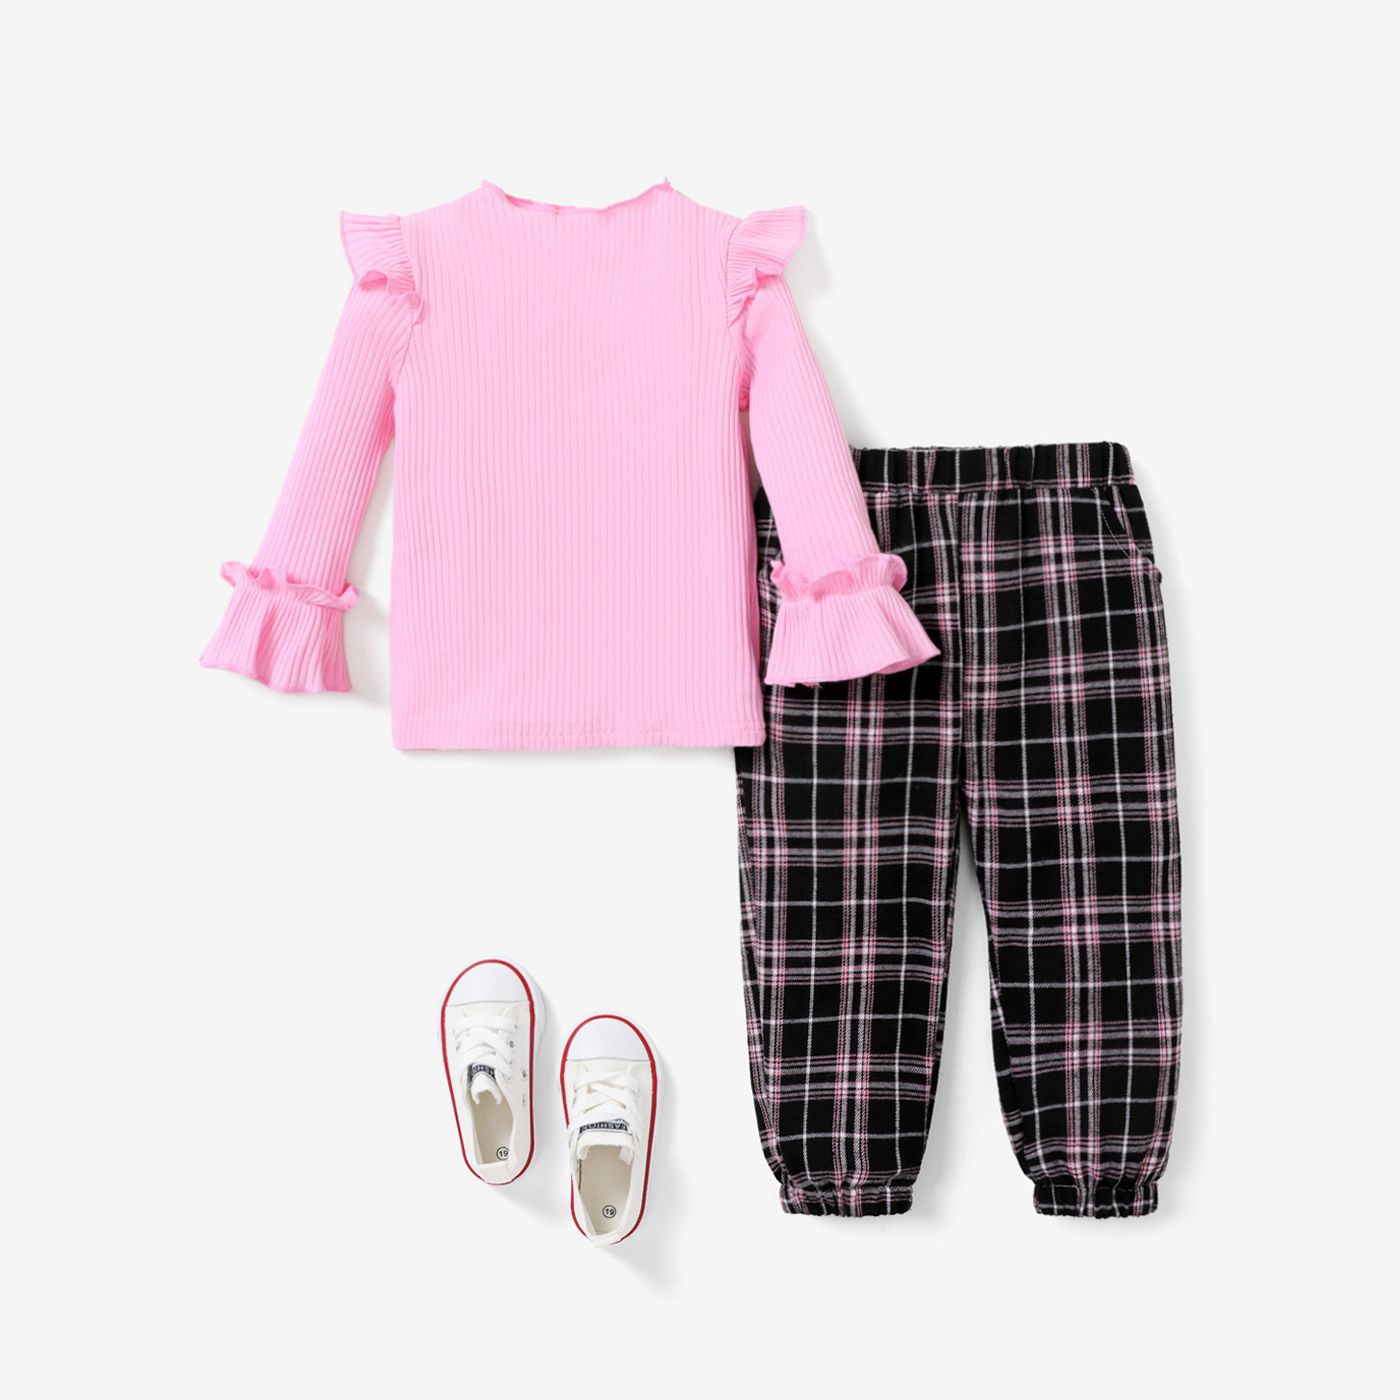 Toddler Girl's Cotton Ruffle 2pcs Set In Avant-garde Style With Grid/Houndstooth Pattern